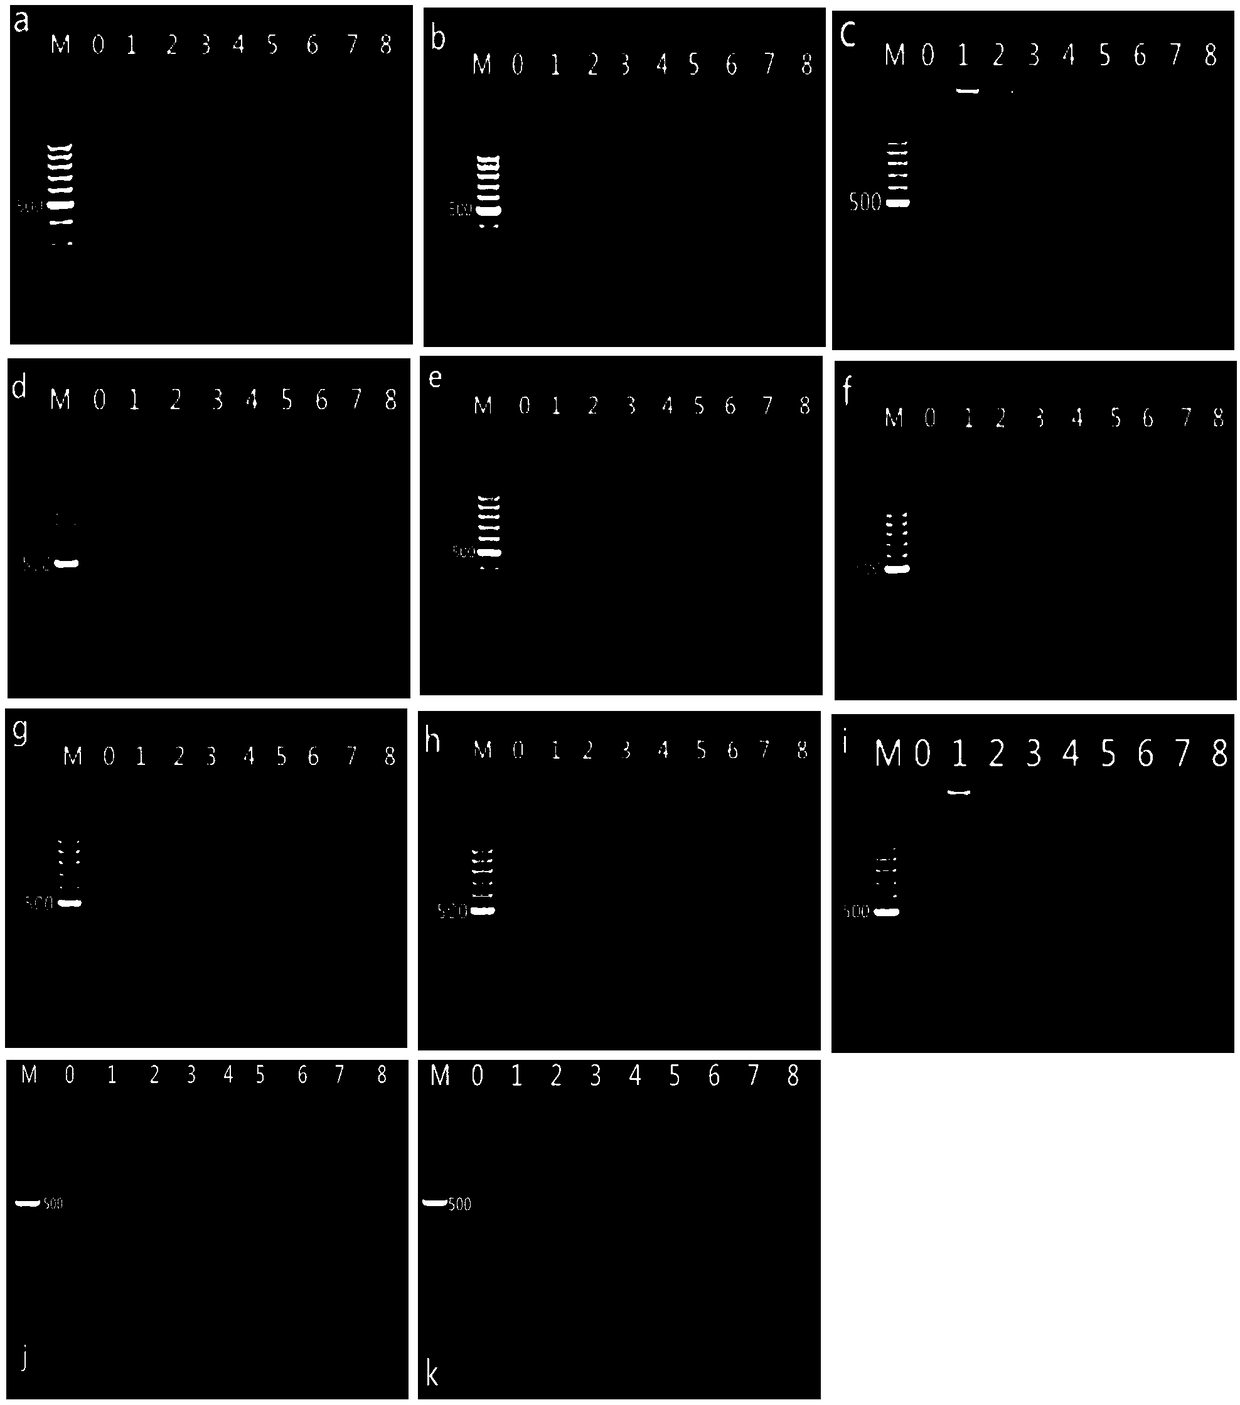 Multiplex PCR detection kit and detection method for detecting thirteen types of transgenic soybeans